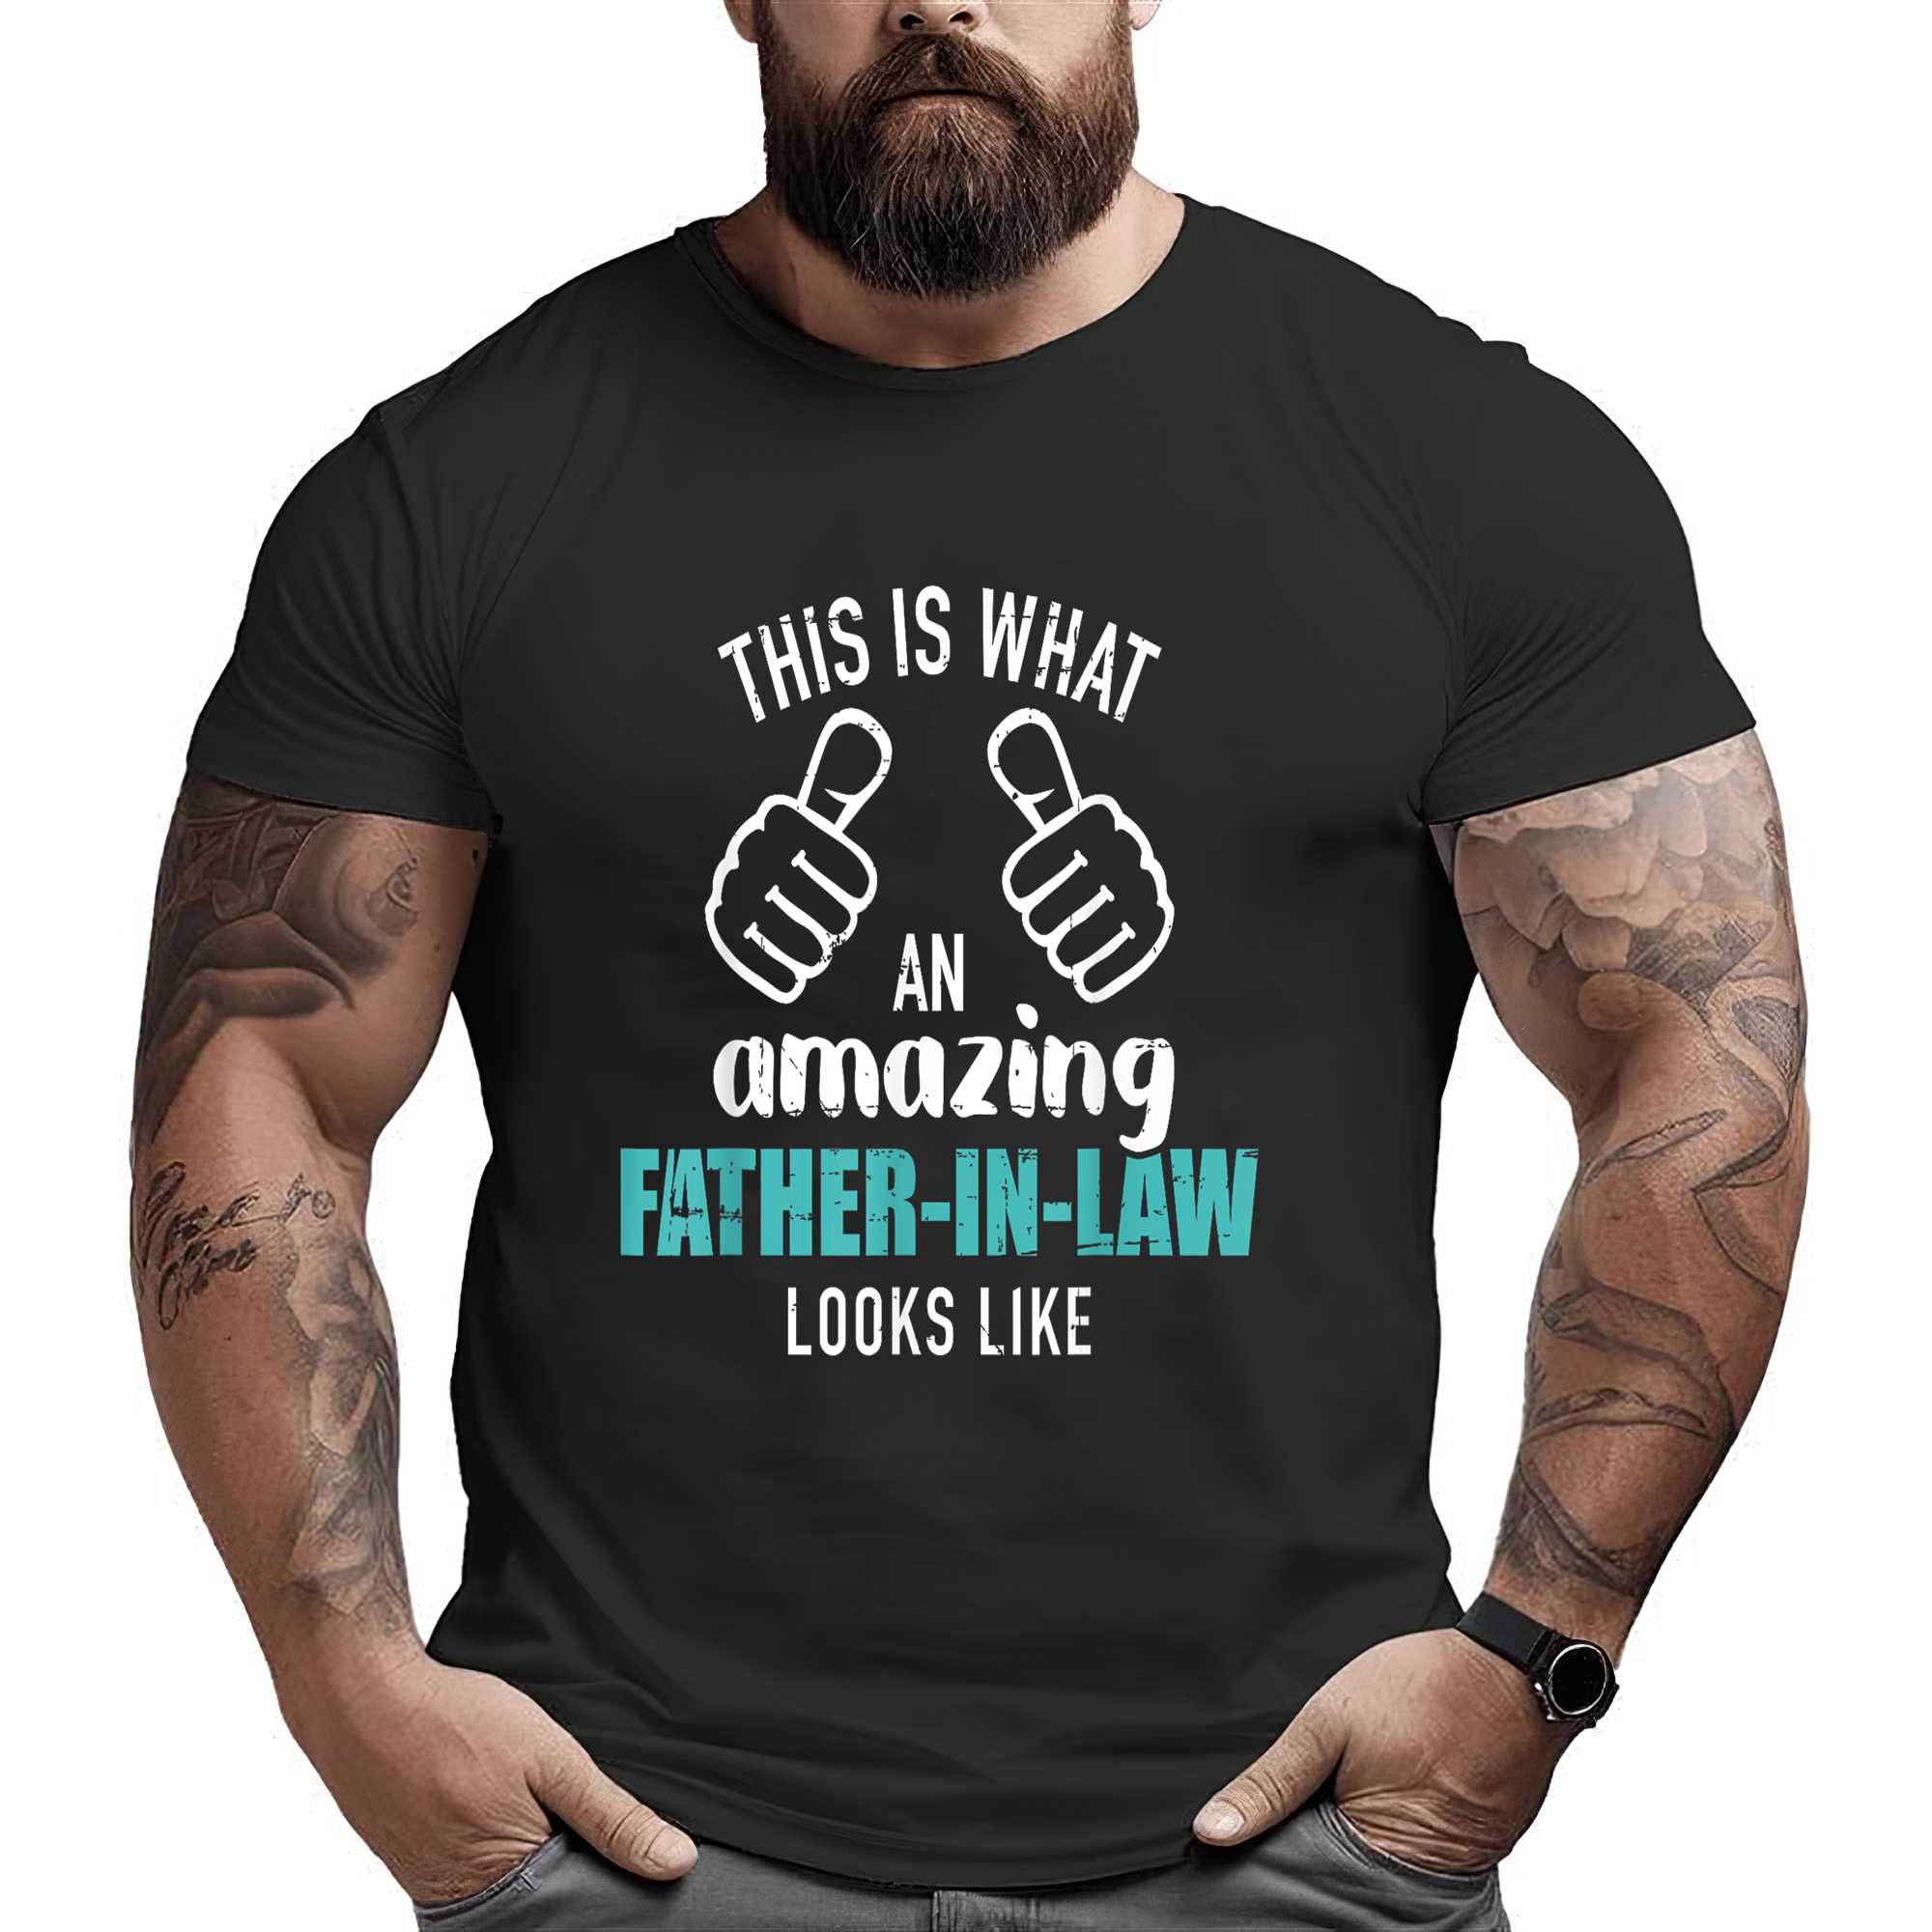 This Is What An Amazing Father-in-law Looks Like T-shirt